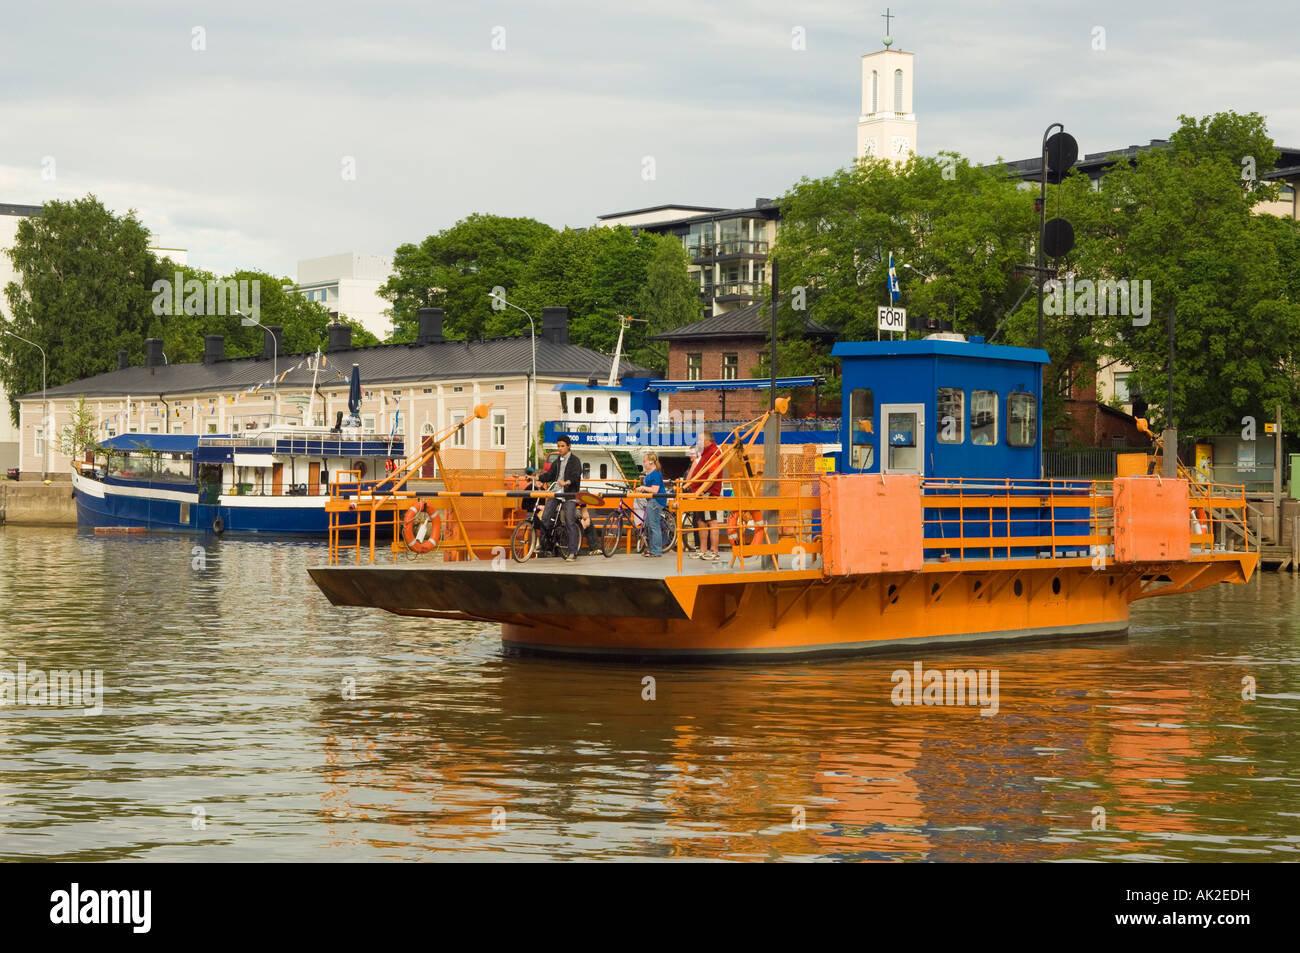 Foot and cycle ferry Föri that shuttles across the River Aura in Turku Swedish Åbo Finland Stock Photo